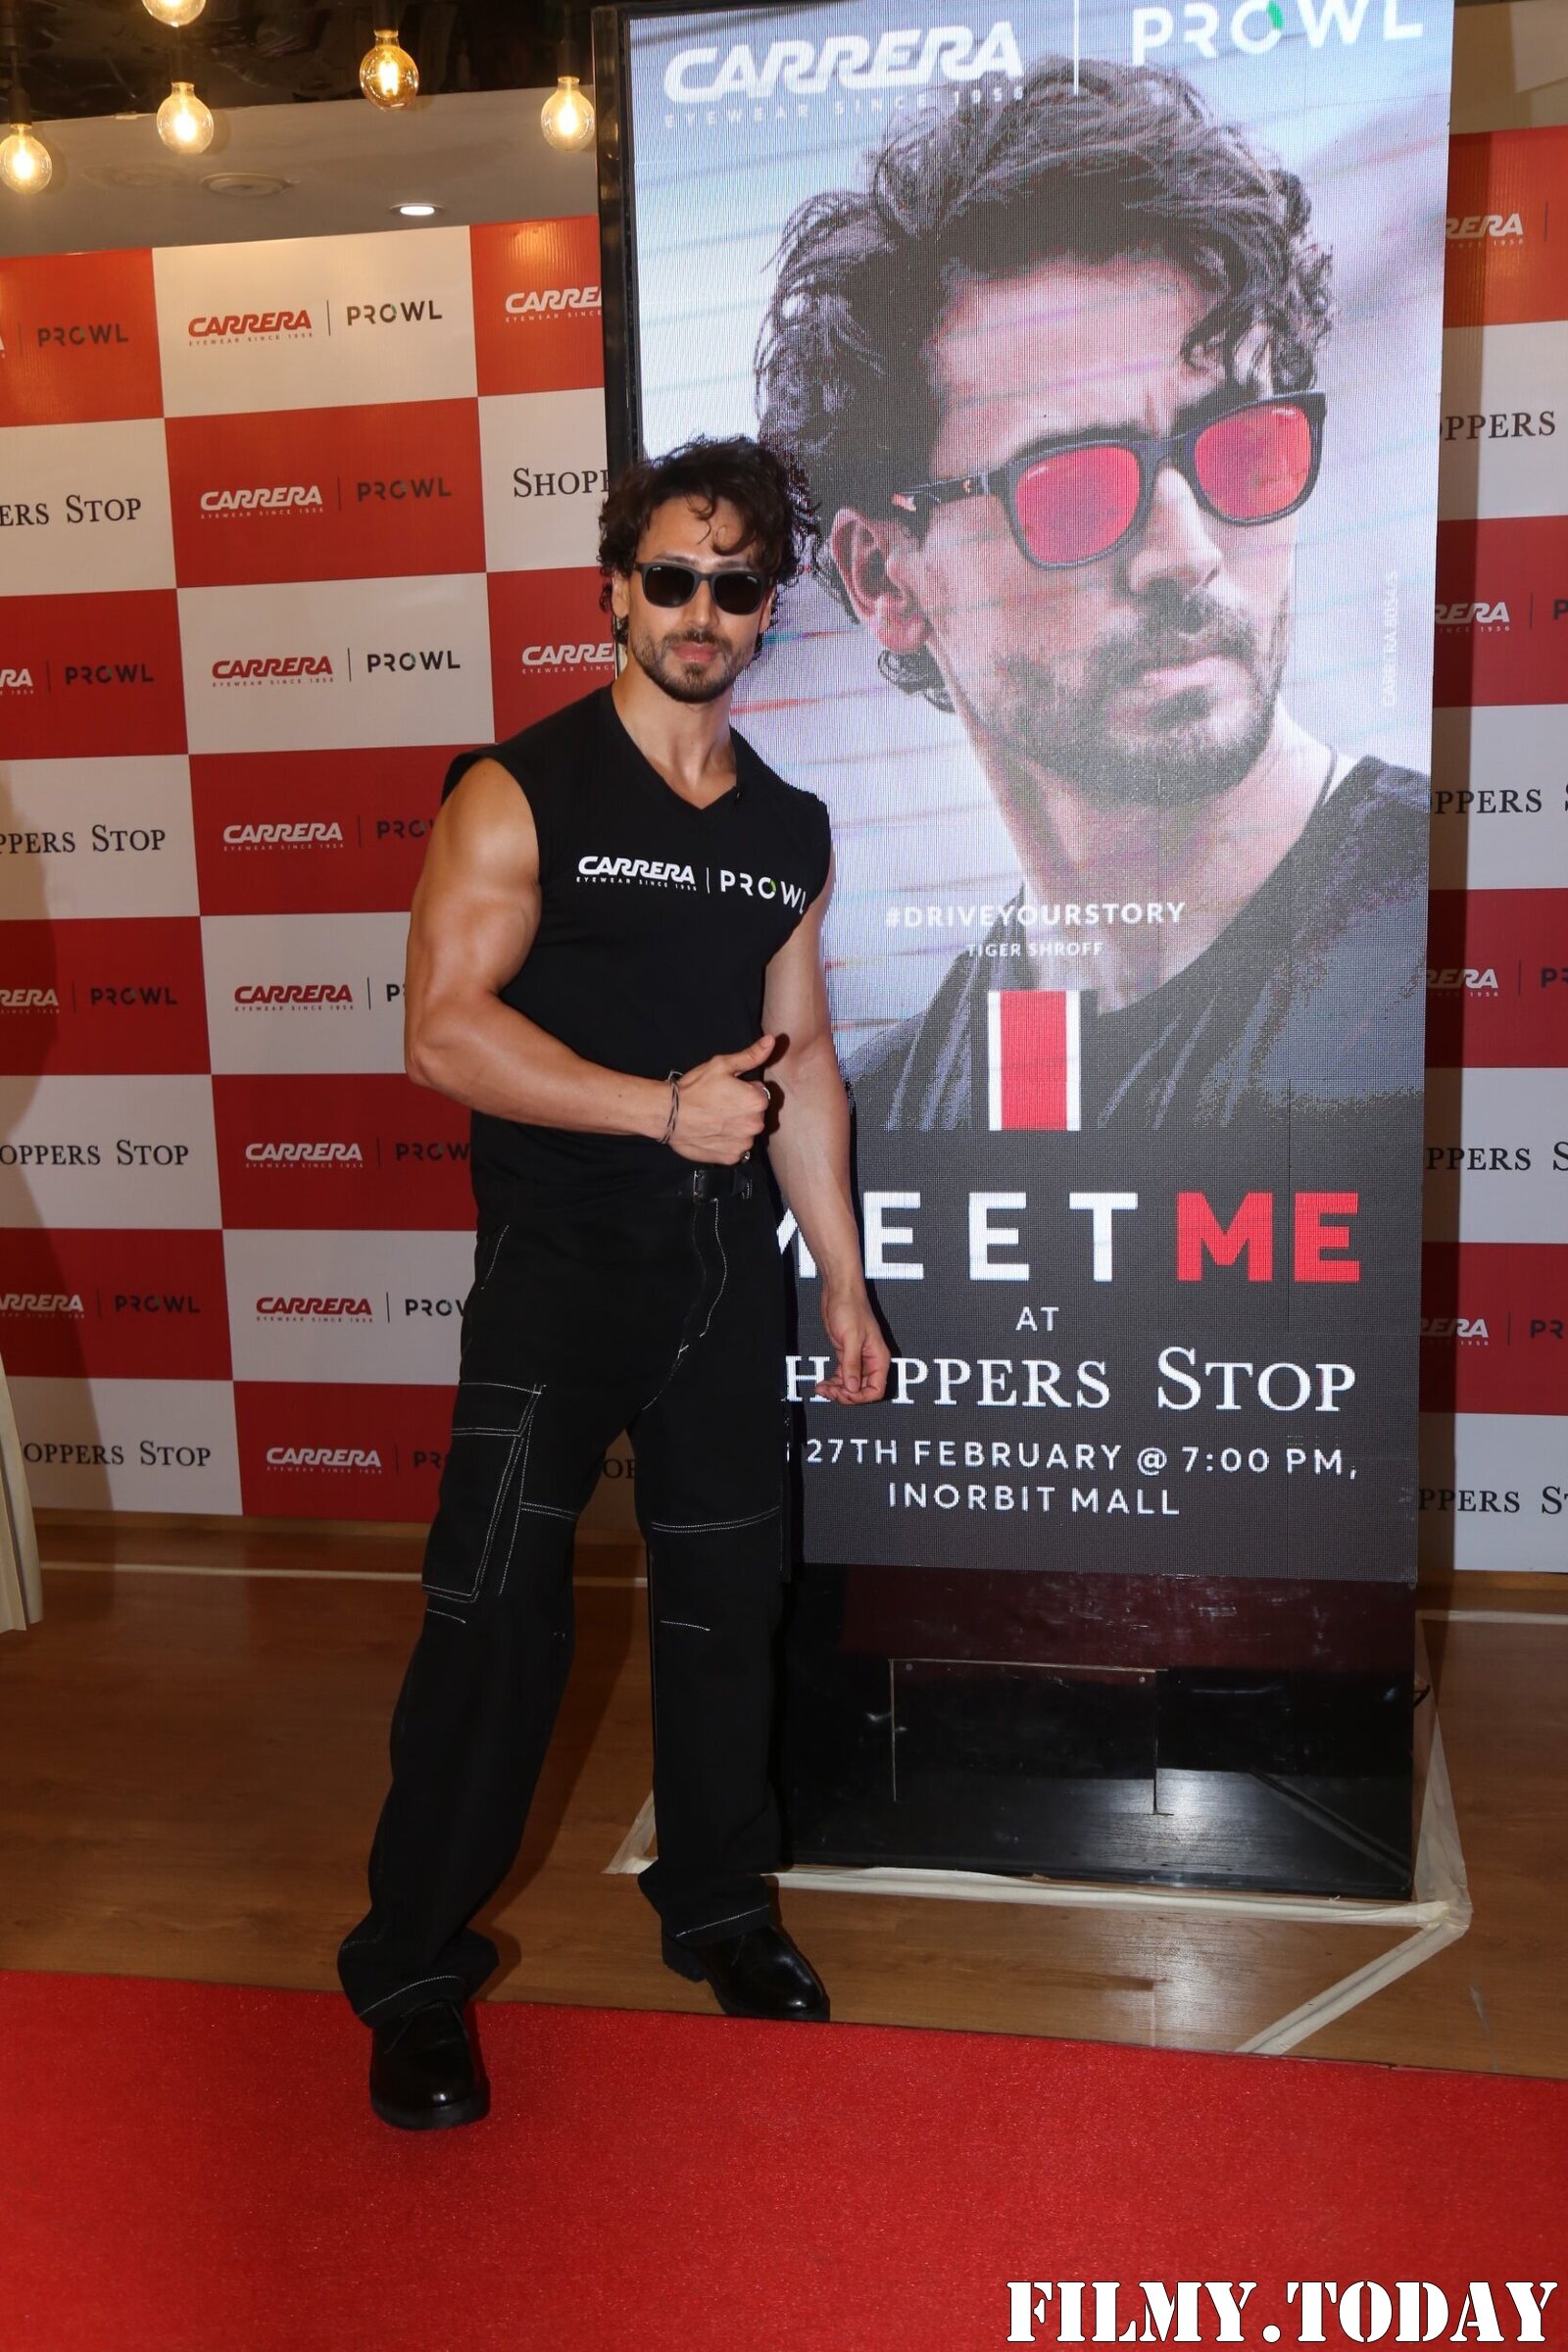 Photos: Tiger Shroff At The Launch Of ‘Carrera X Prowl’ Eyewear Collection | Picture 1923064